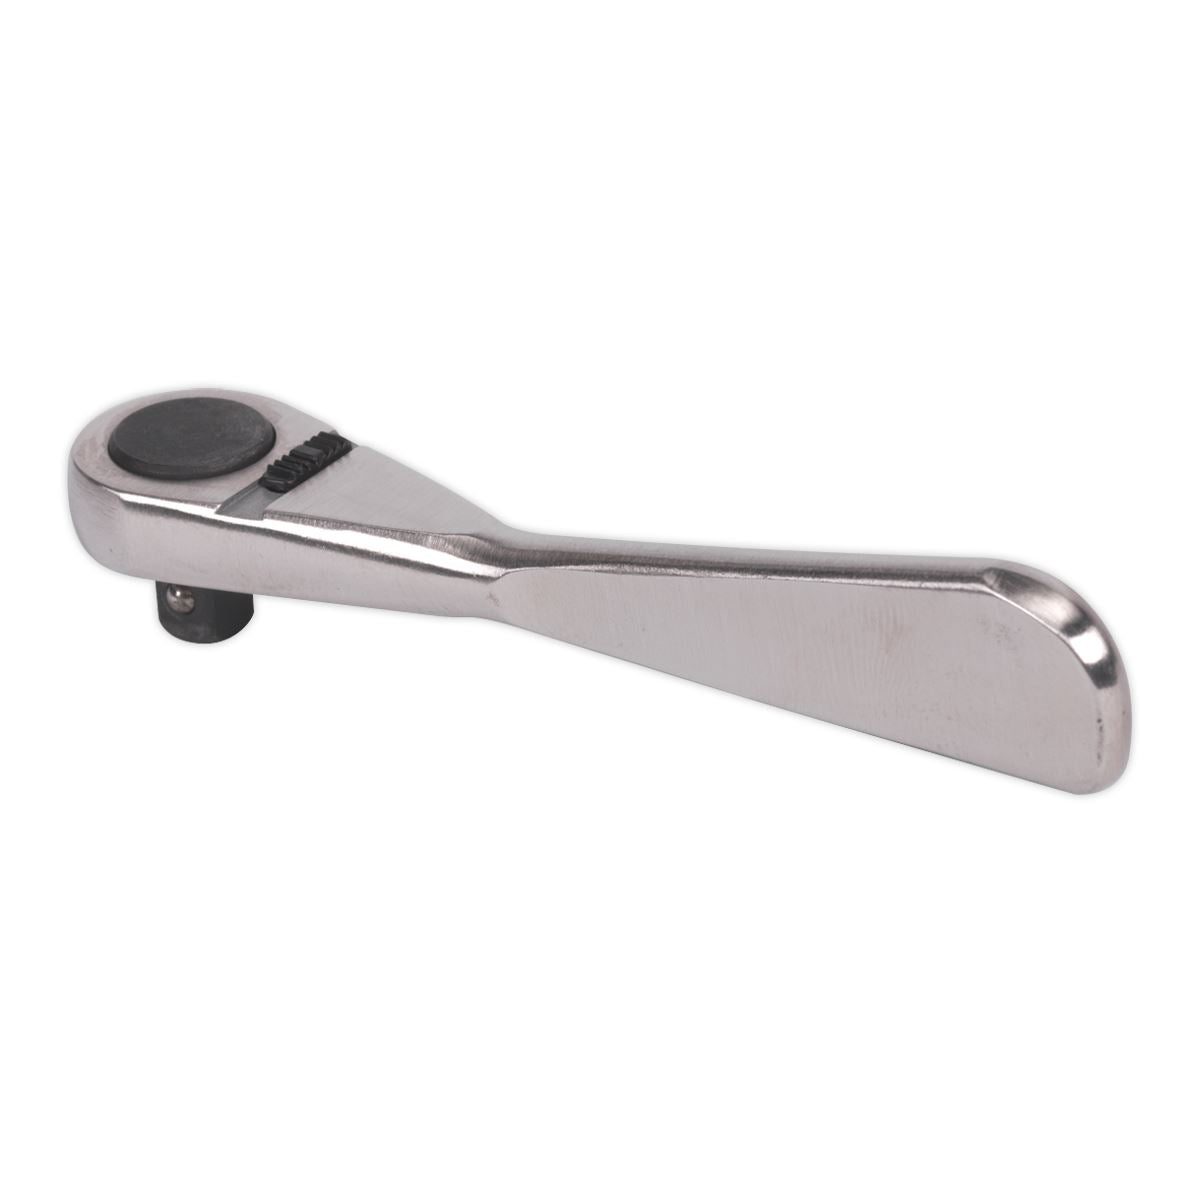 Sealey Premier Ratchet Wrench Micro 1/4"Sq Drive Stainless Steel